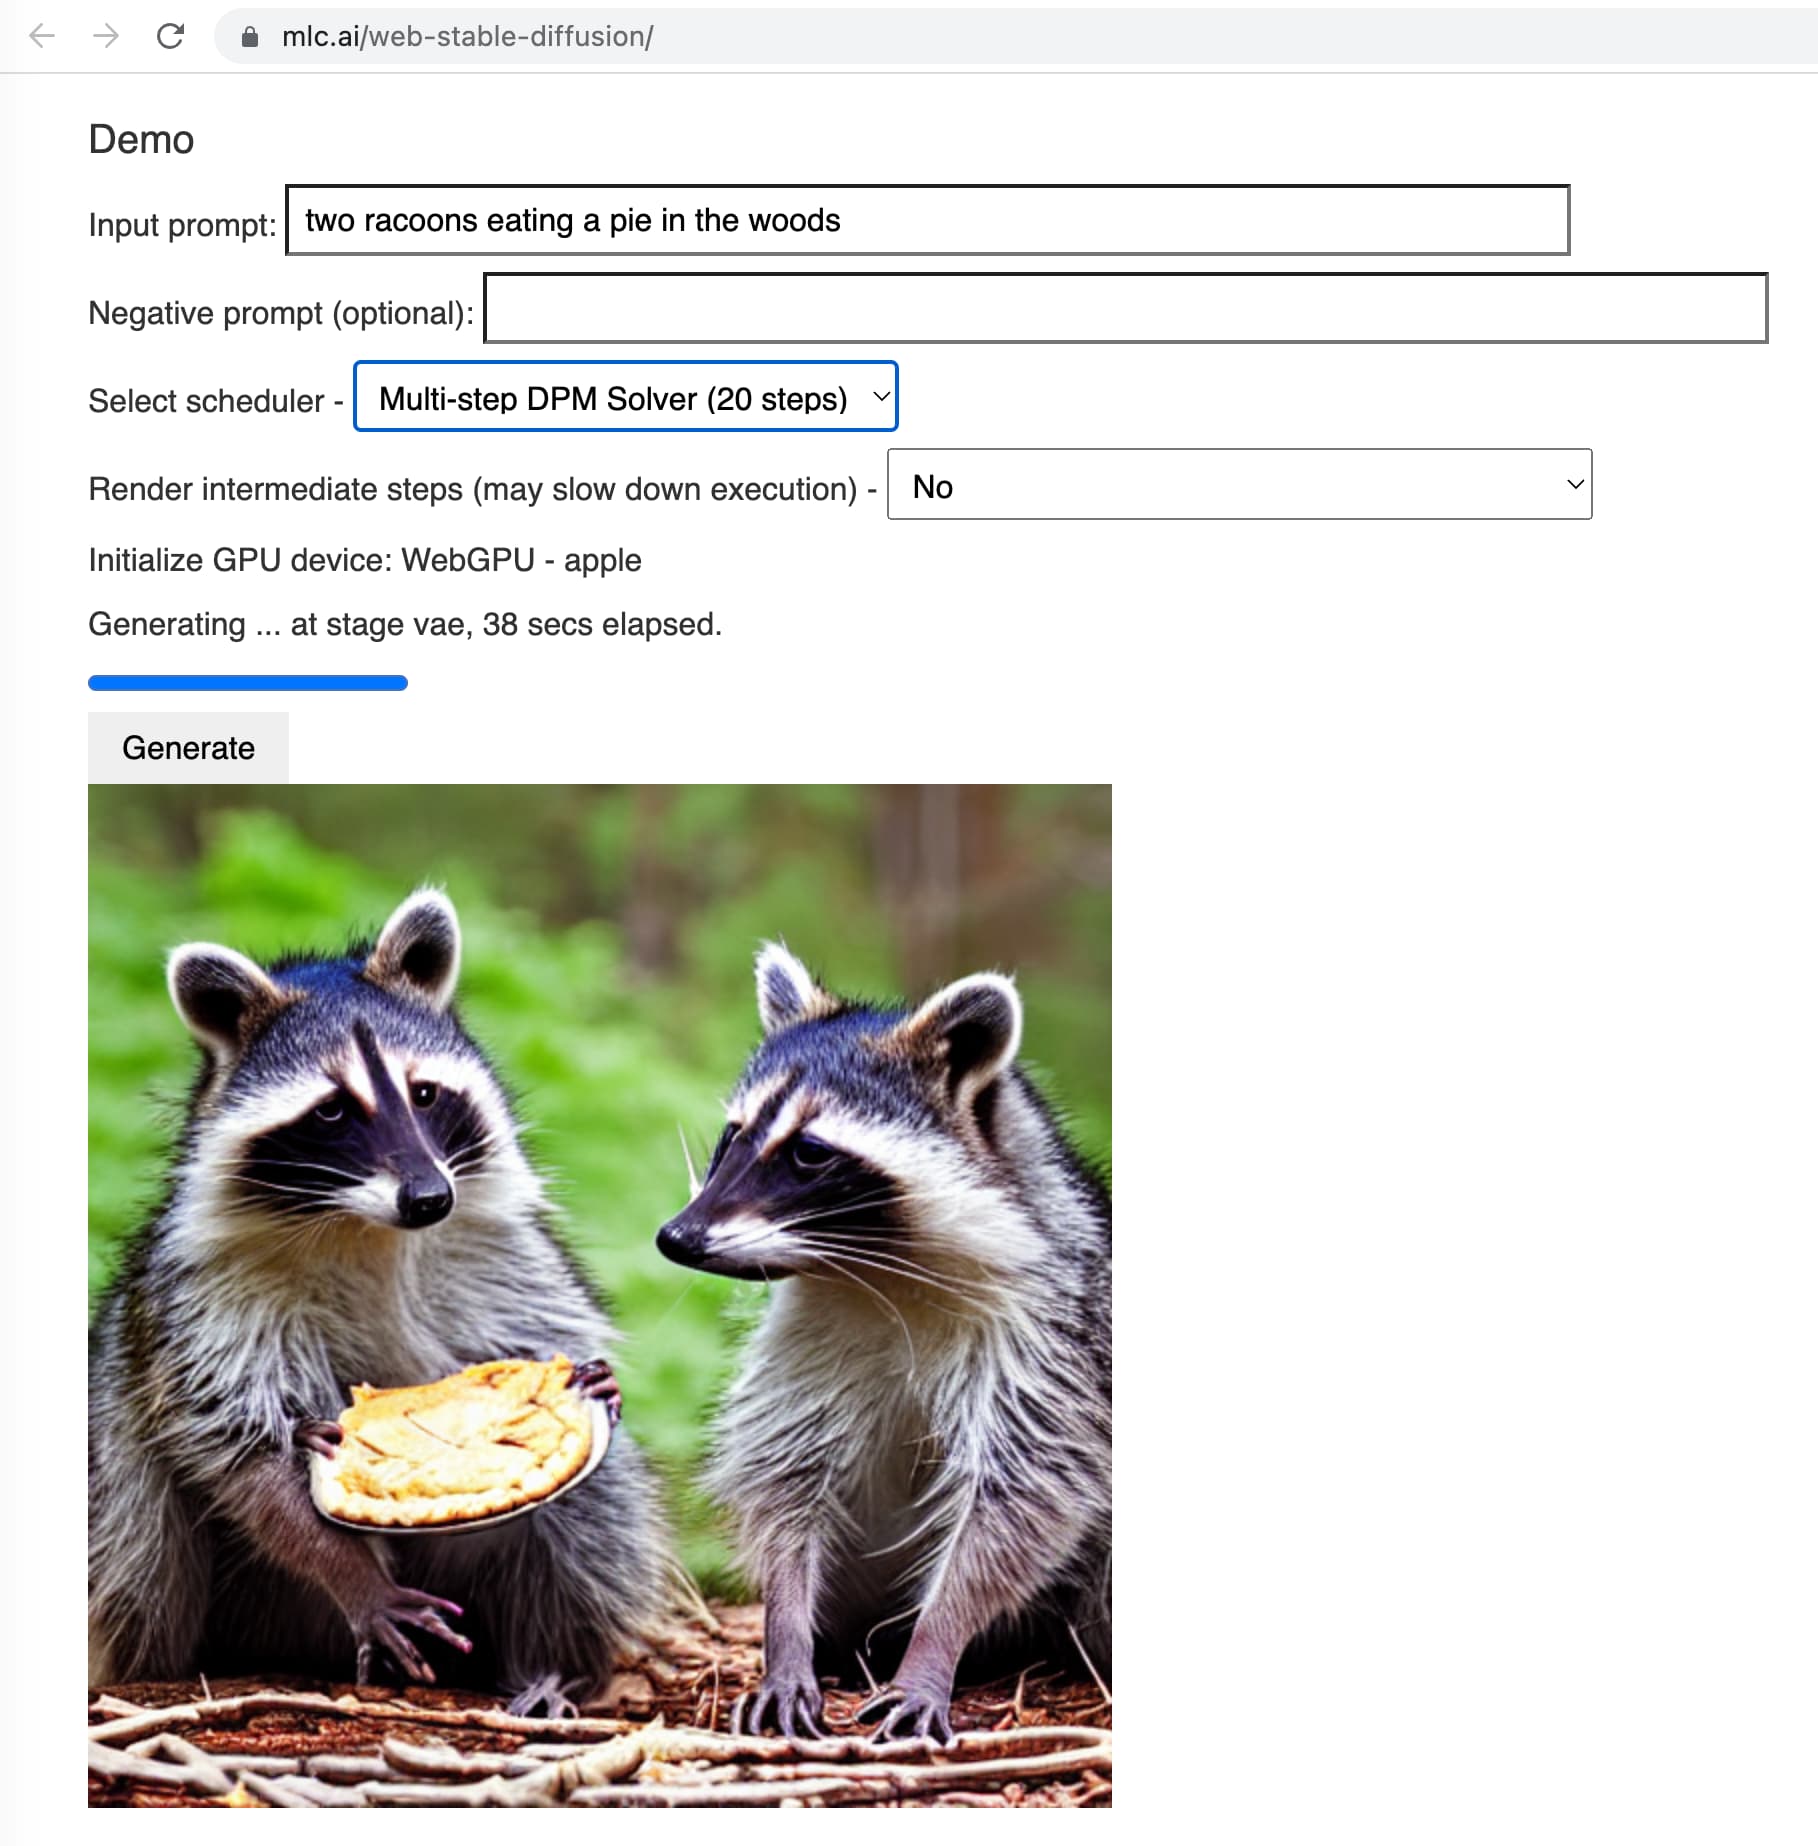 mig.ai/web-stable-diffusion/ in a browser. The input prompt is two racoons eating a pie in the woods, with the default 20 step scheduler. After 38 seconds elapsed on the prograss bar a realistic photograph of two raccoons eating a fruit pie appears - although on closer inspection the raccoon holding the pie has three paws!